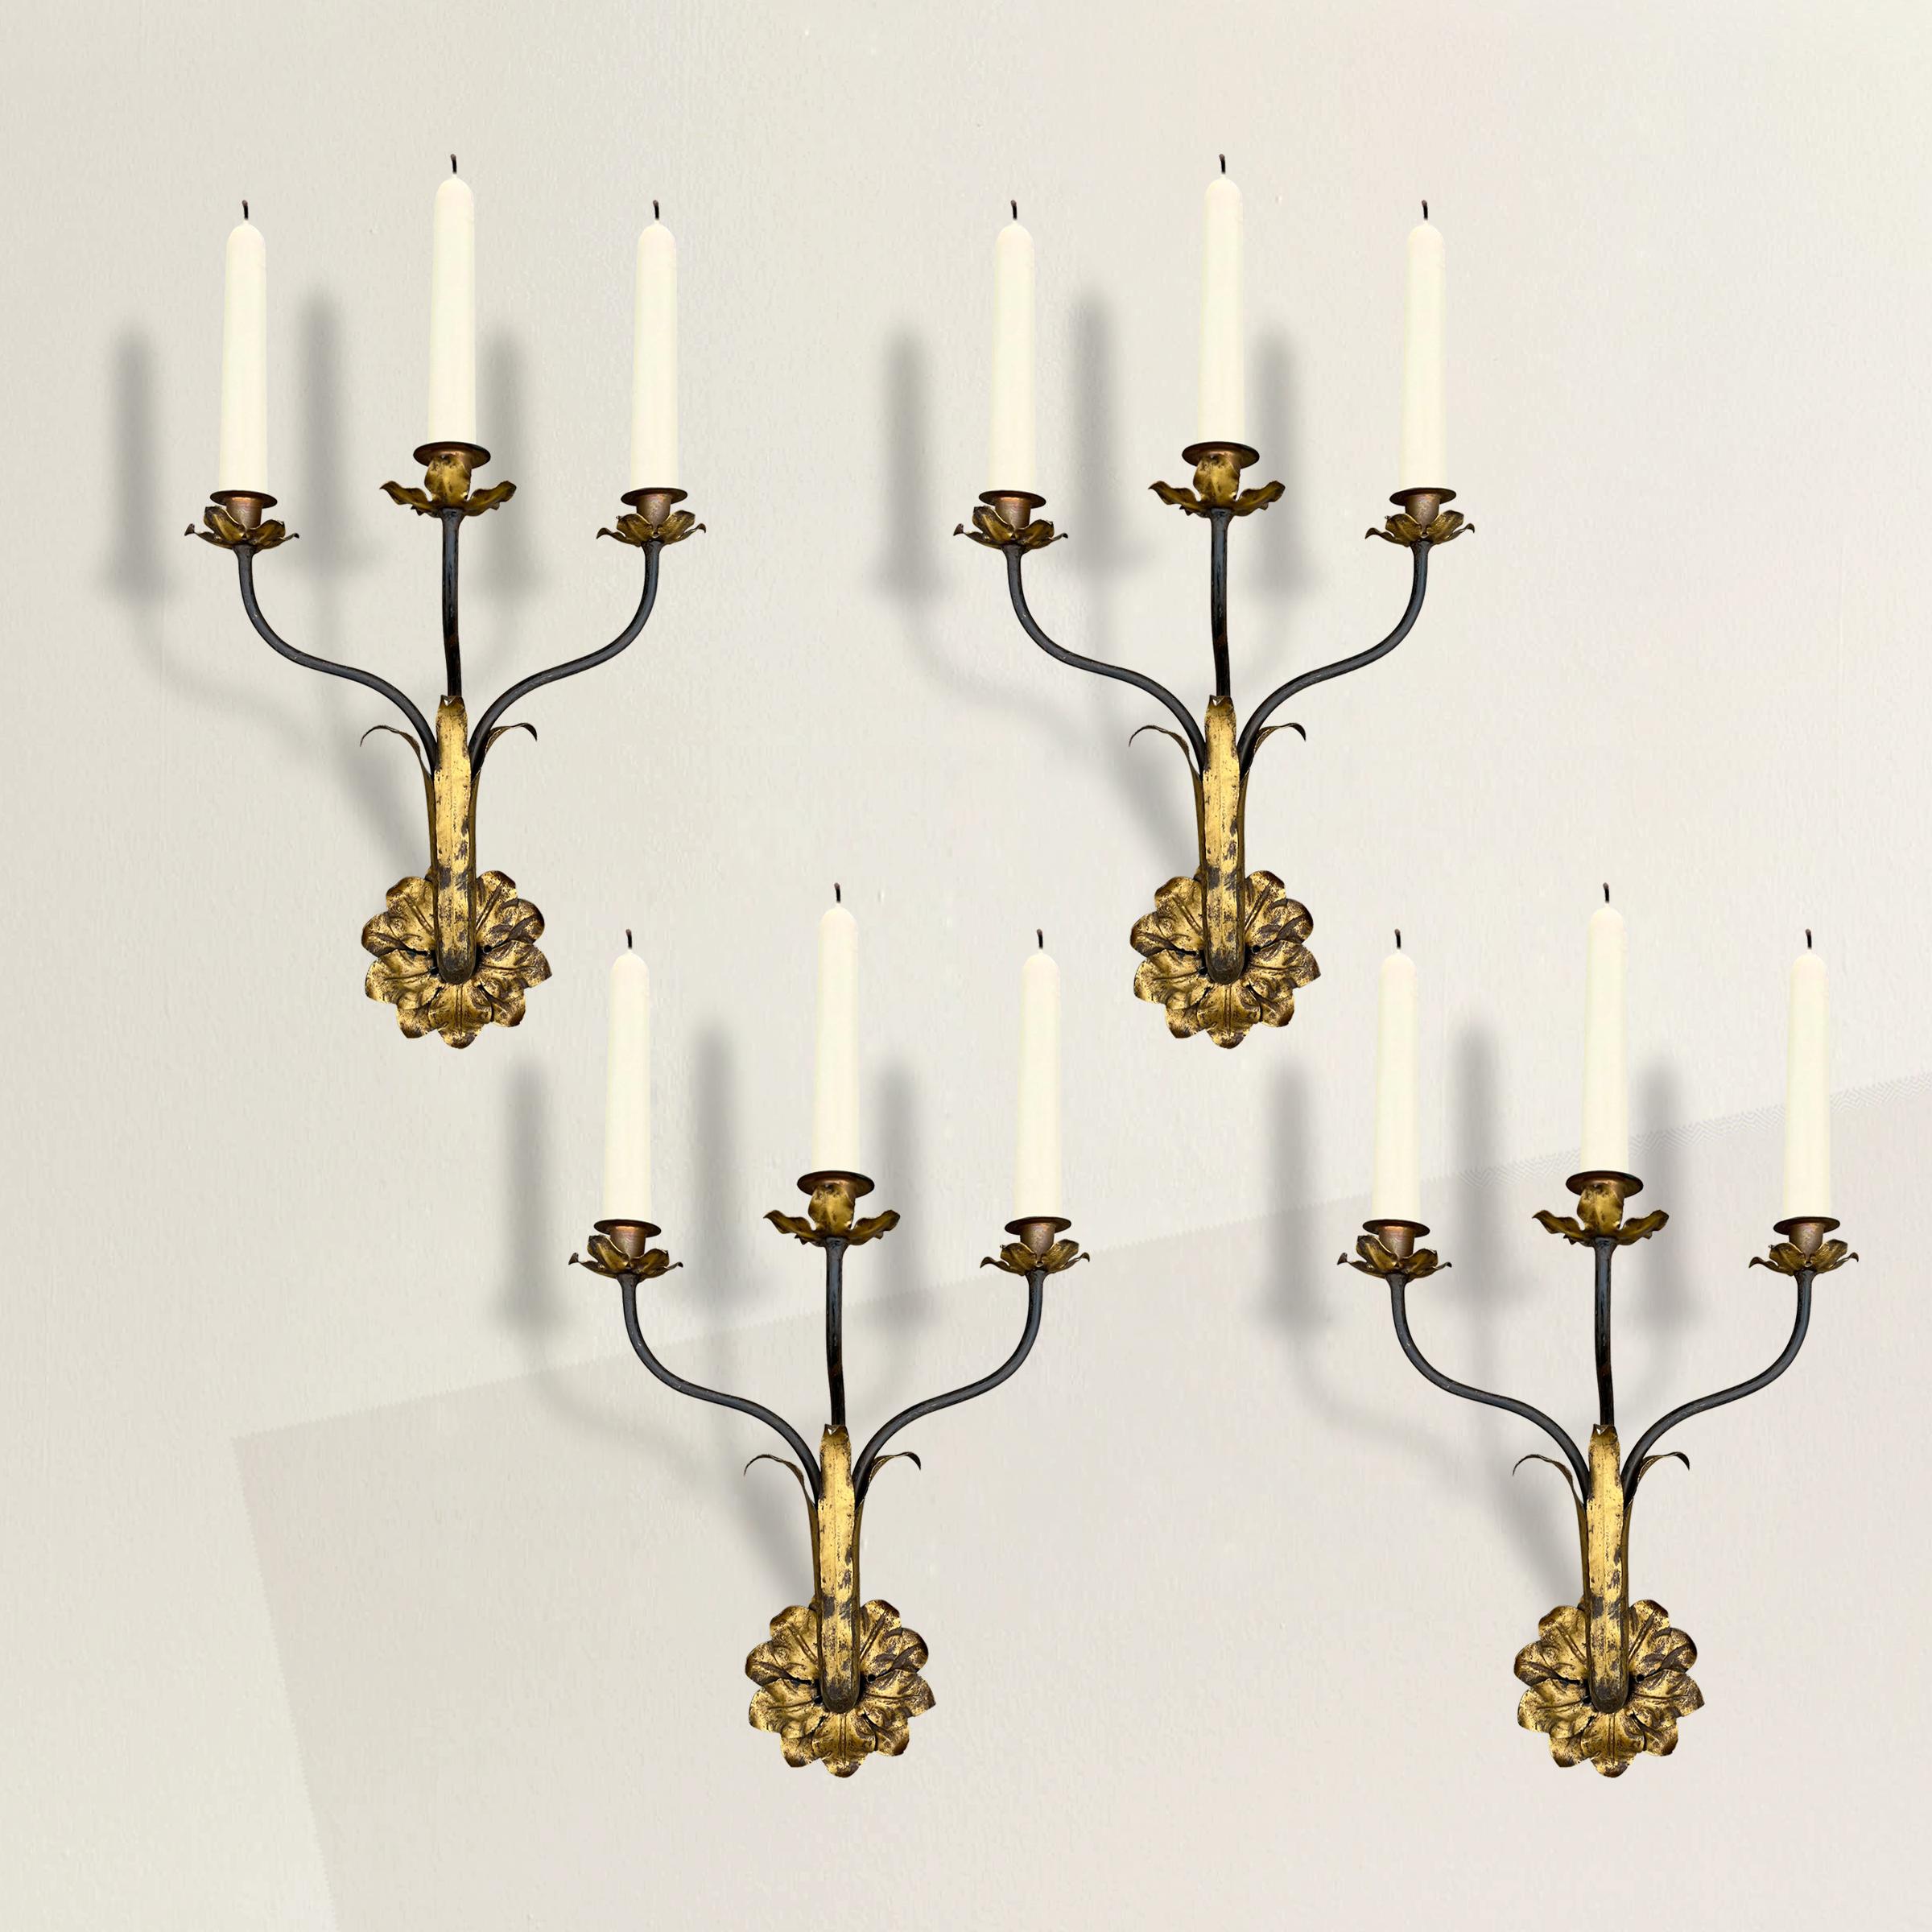 Elevate your interior with the timeless elegance of this set of four early 20th century Italian three-arm gilt iron candle sconces. Crafted with exquisite artistry, these sconces effortlessly blend classic design elements with a touch of opulence.